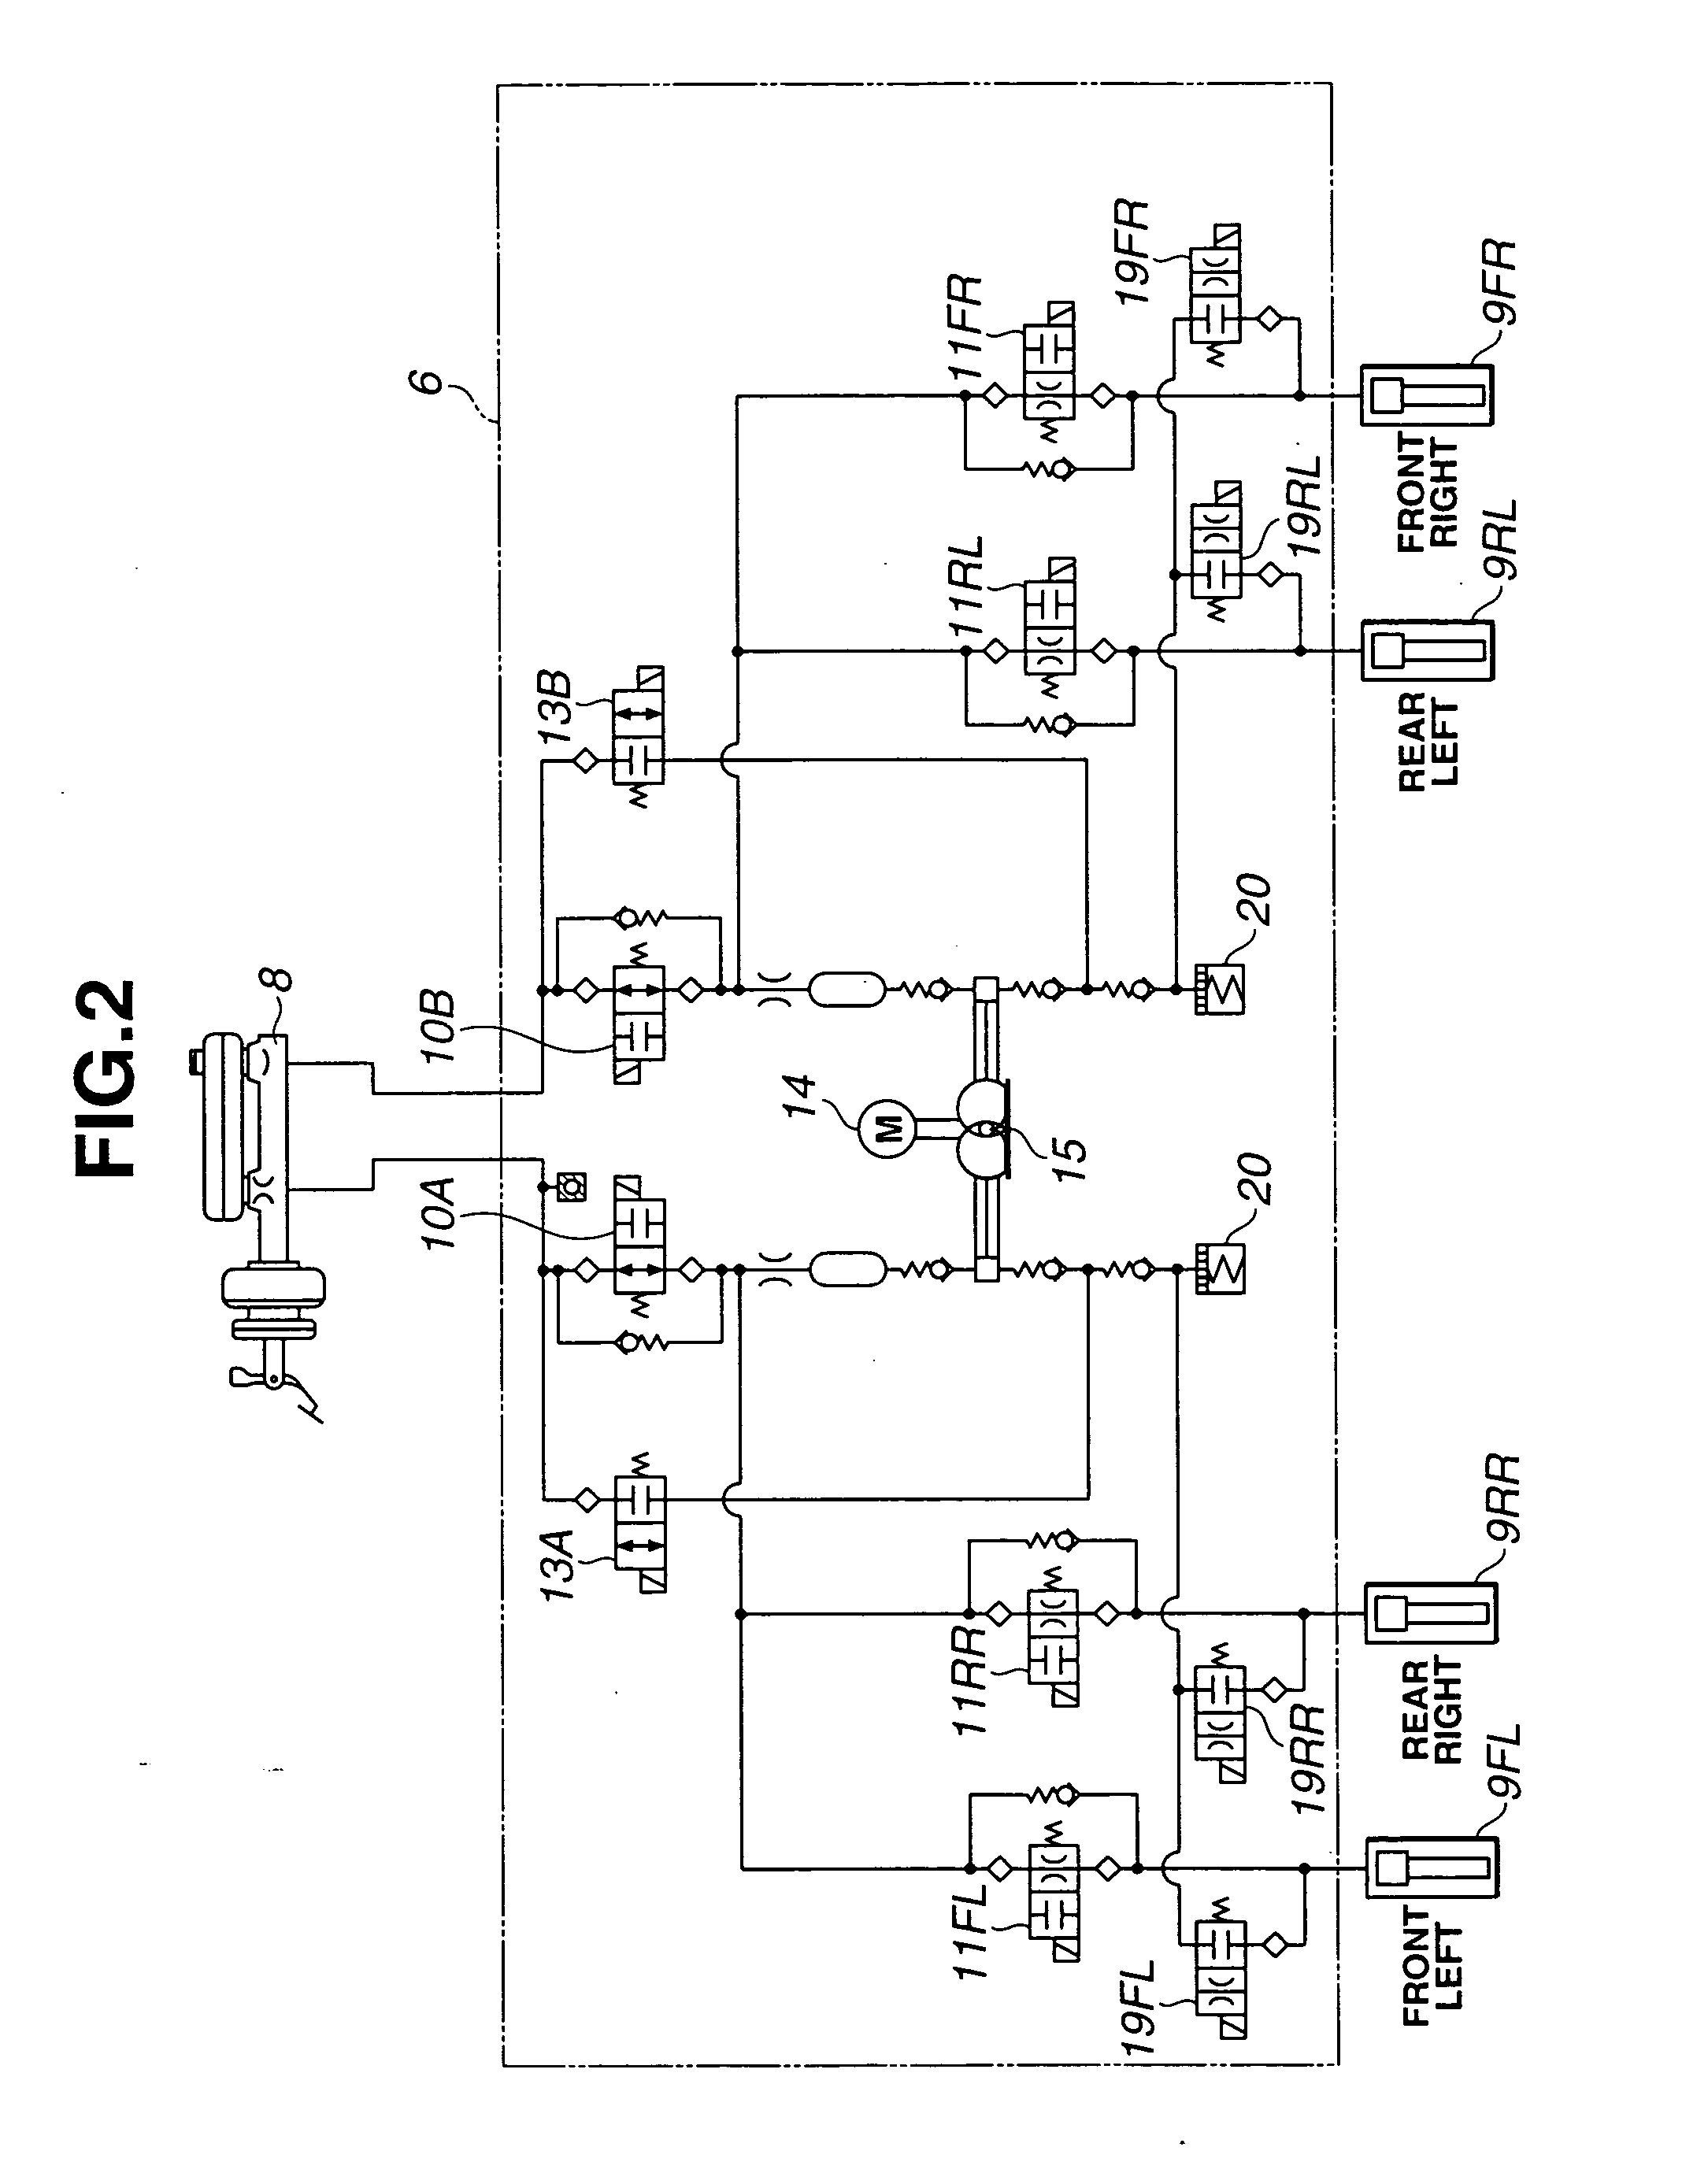 Turning control apparatus and method for automotive vehicle